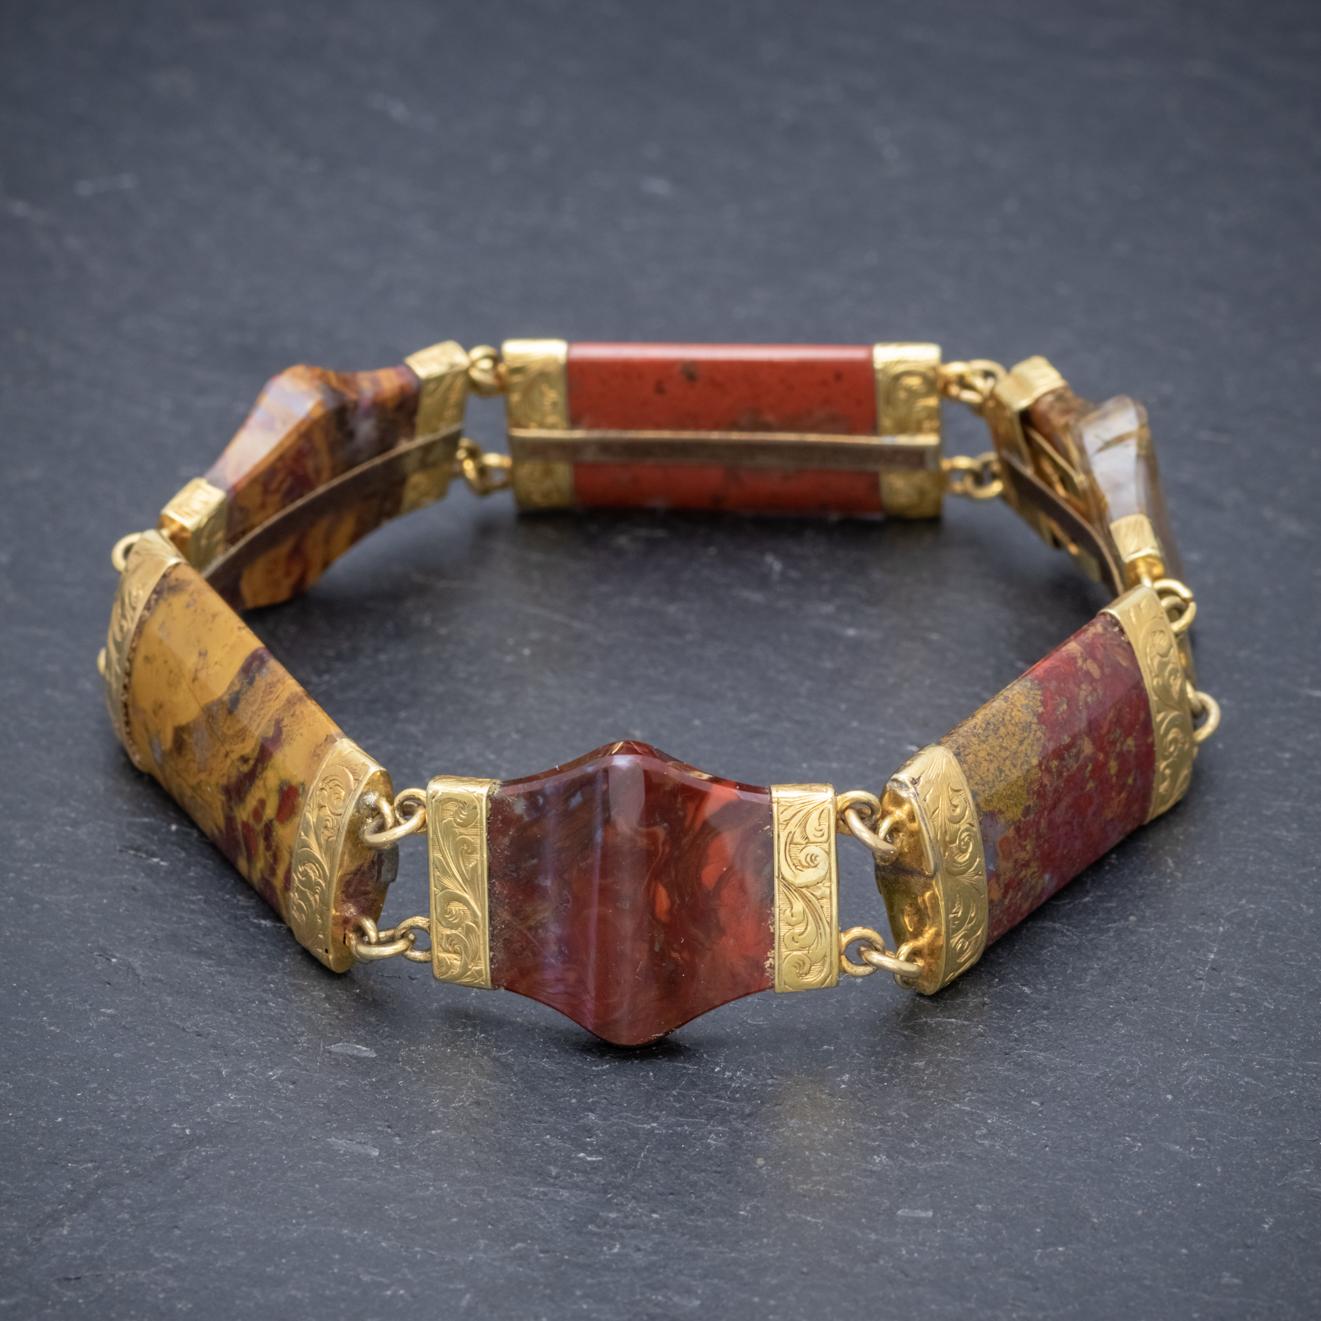 An exquisite antique Victorian Scottish bracelet made up of wonderful Agate links which have been cut into unique shapes. The stones have lovely natural patterns and earthy colouring which are unique to each stone.

Each Agate is tipped with 18ct